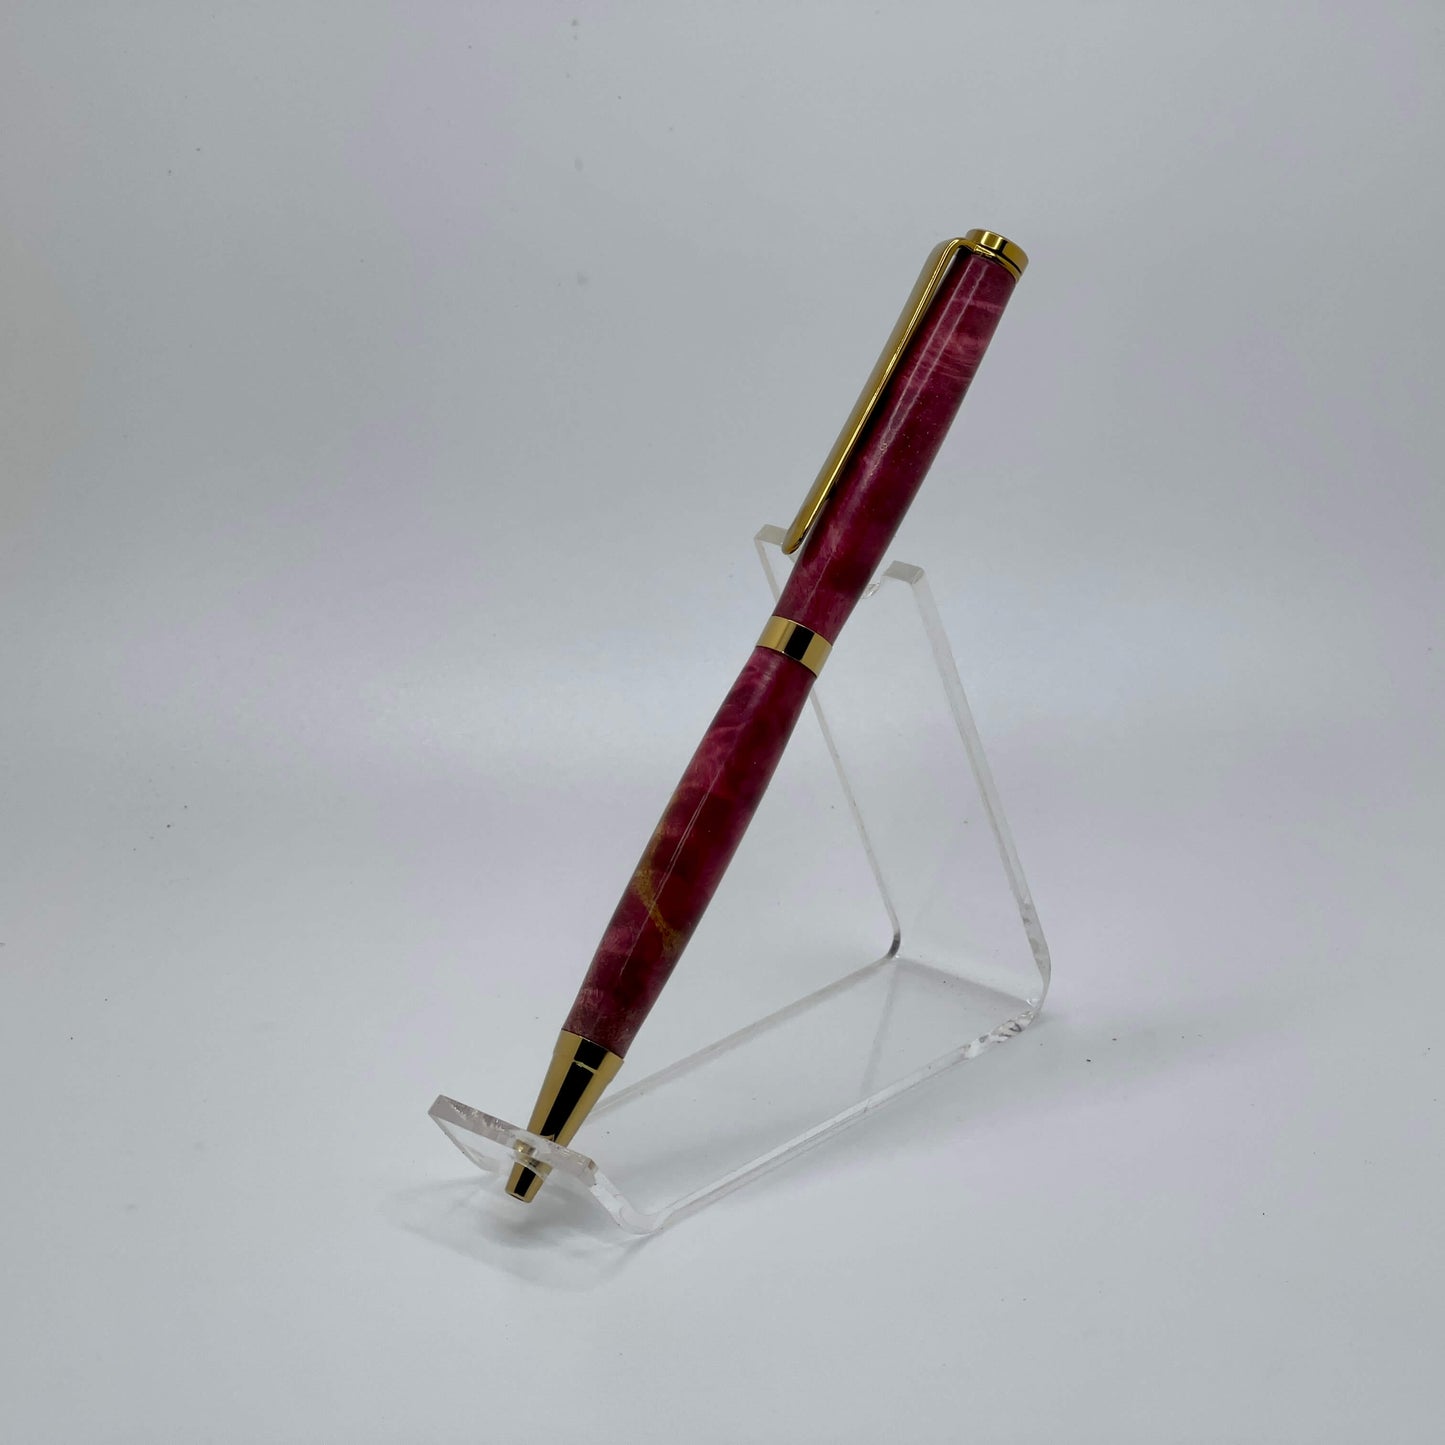 Right side view of handcrafted pen with Box Elder Burl wood dyed magenta